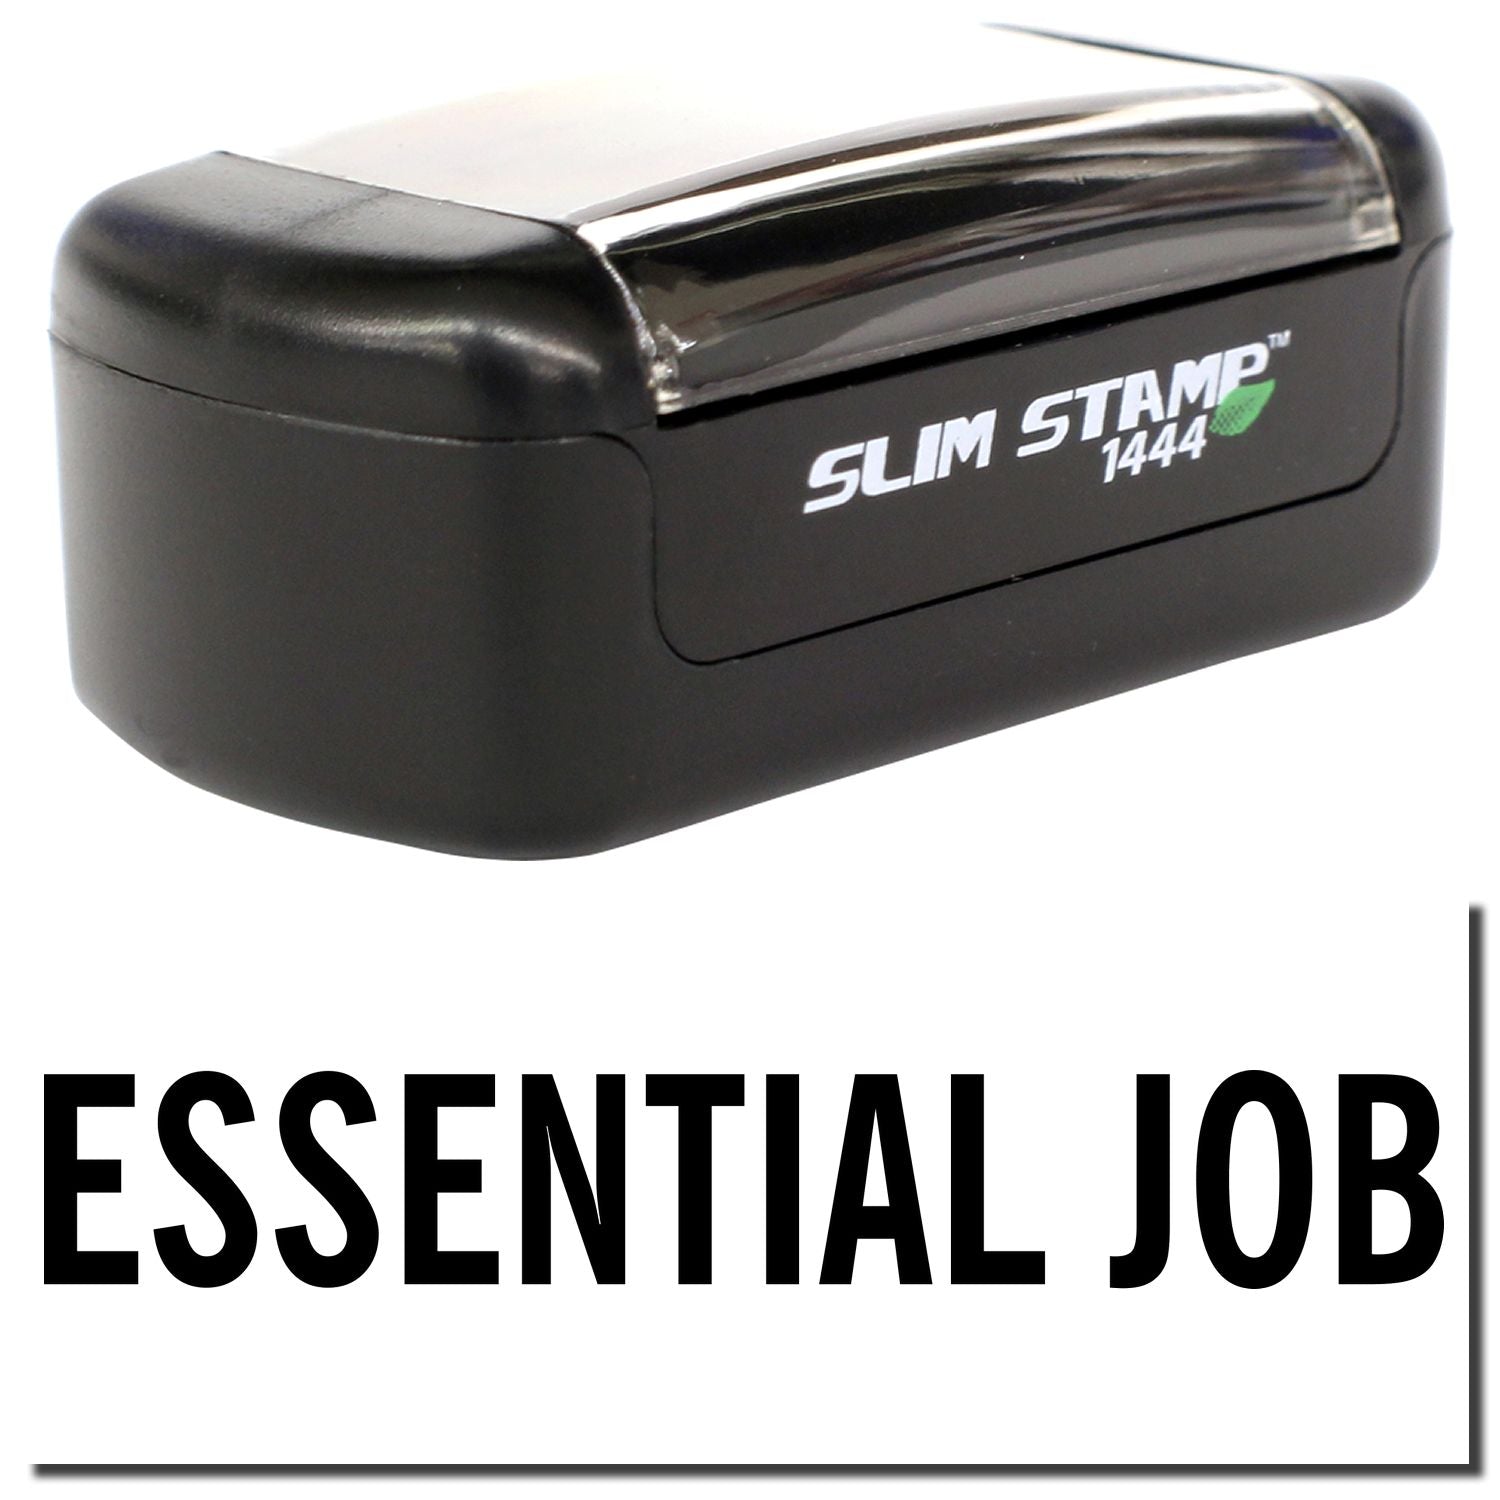 A stock office pre-inked stamp with a stamped image showing how the text "ESSENTIAL JOB" is displayed after stamping.